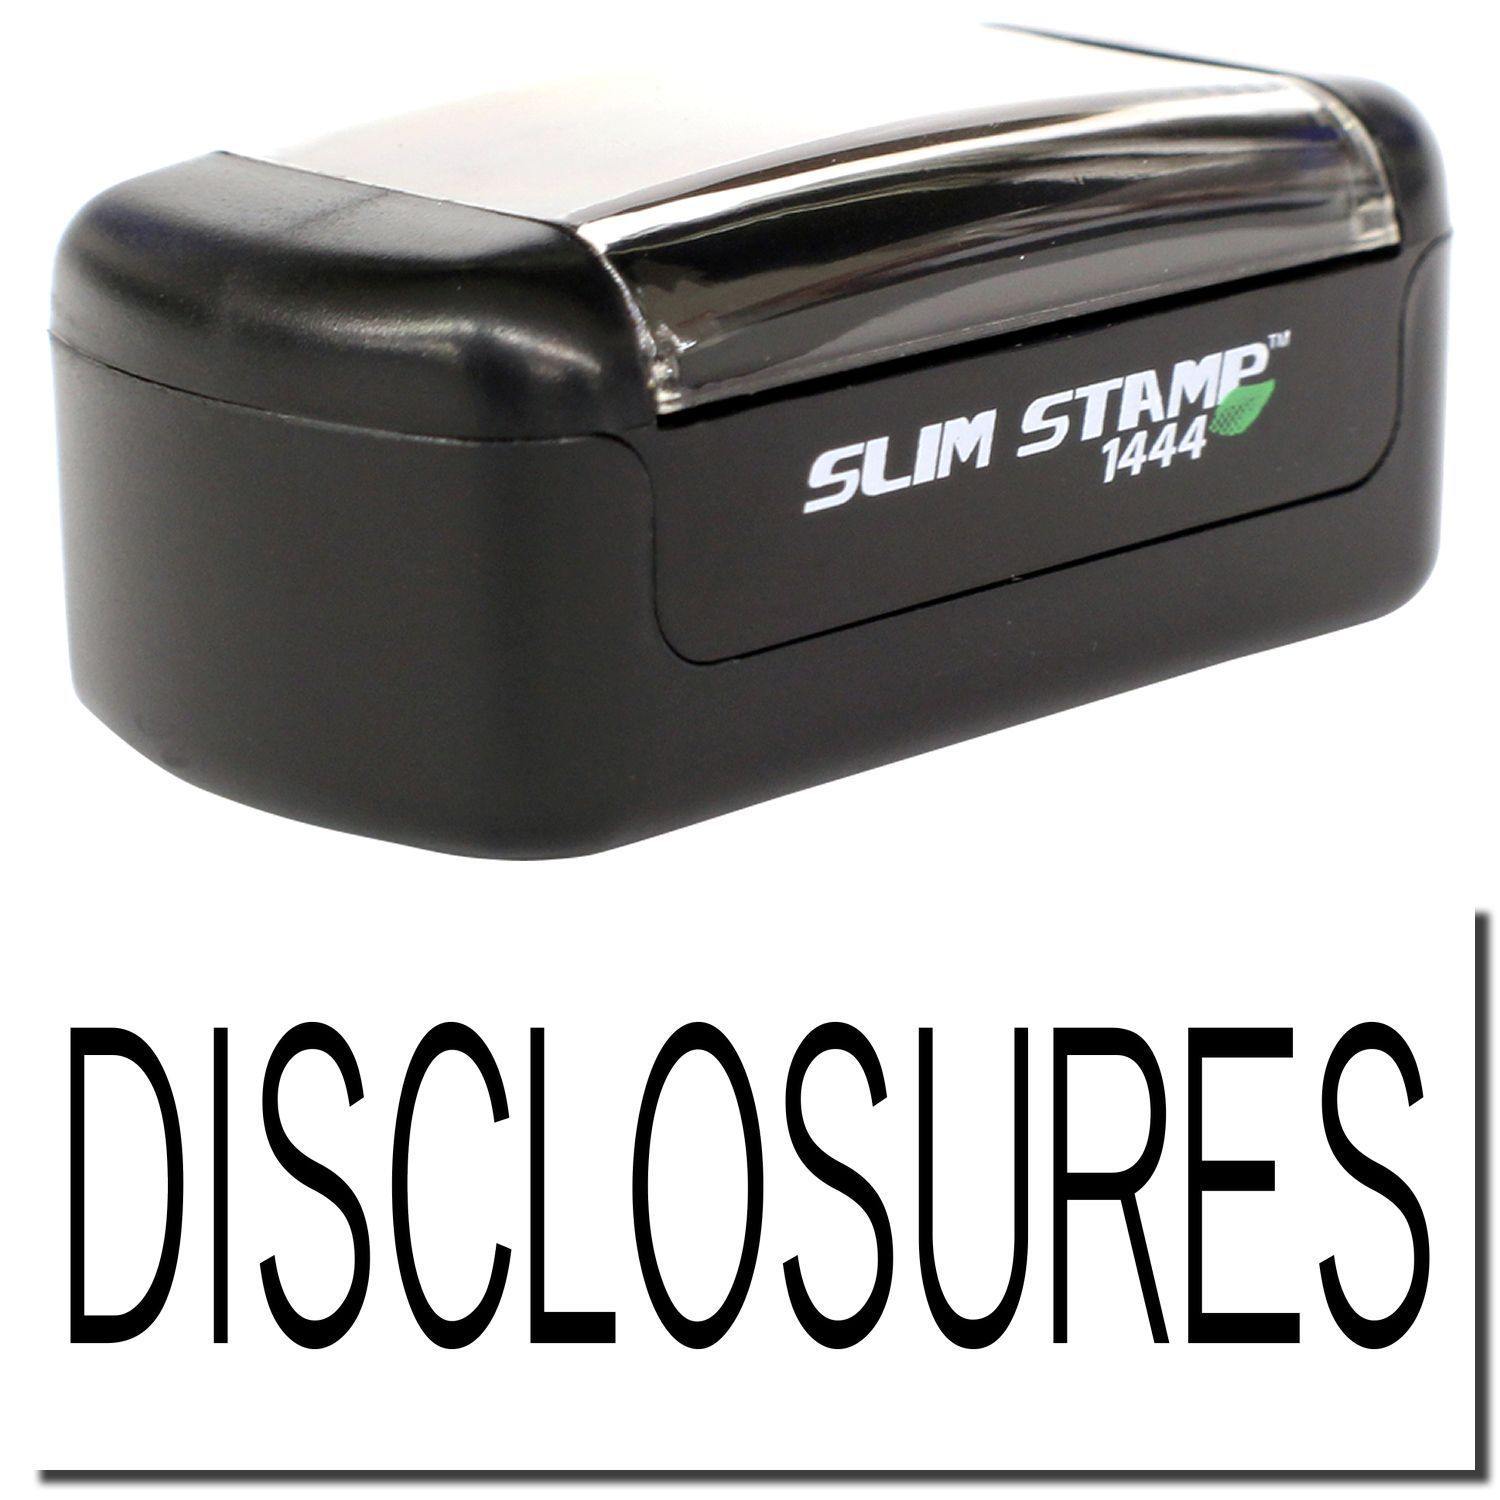 A stock office pre-inked stamp with a stamped image showing how the text "DISCLOSURES" is displayed after stamping.